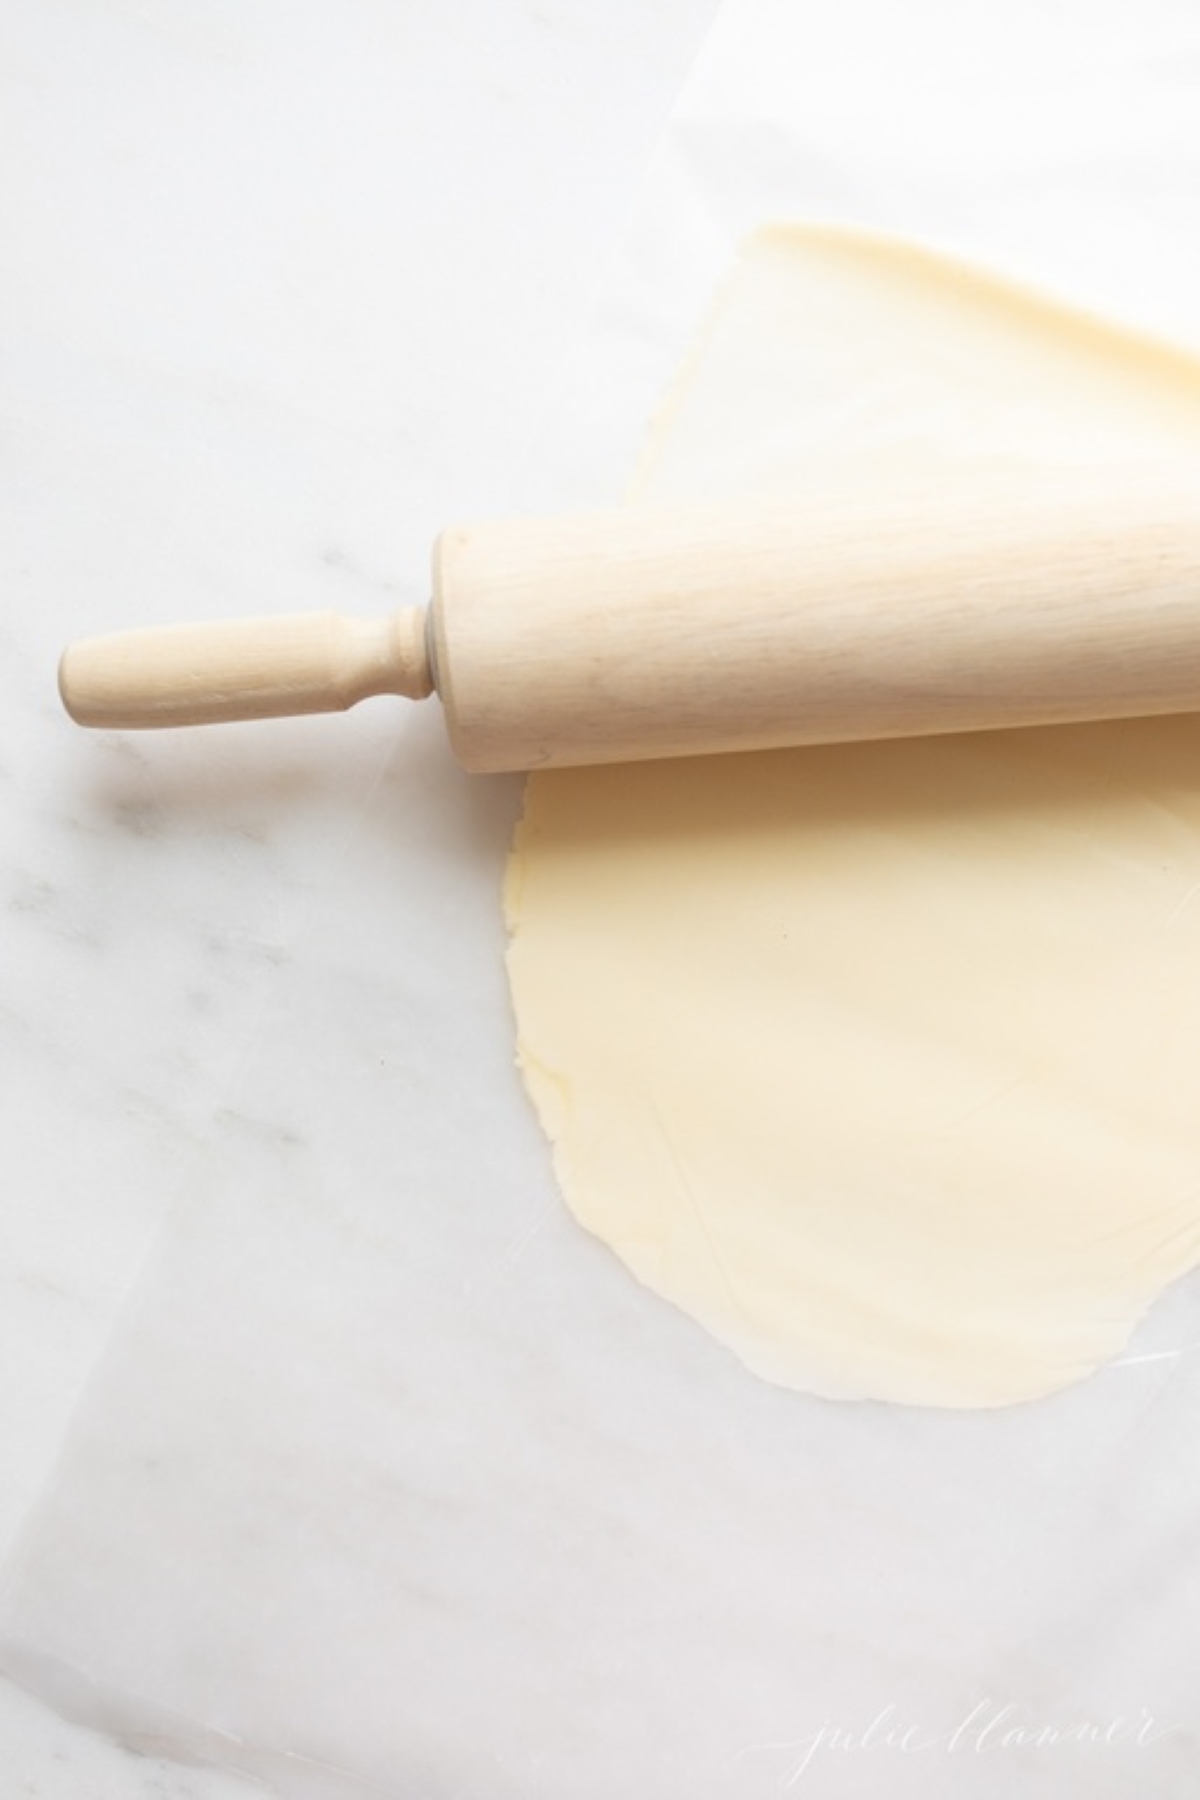 A wooden rolling pin next to a stick of butter that's flattened in between two sheets of waxed paper.